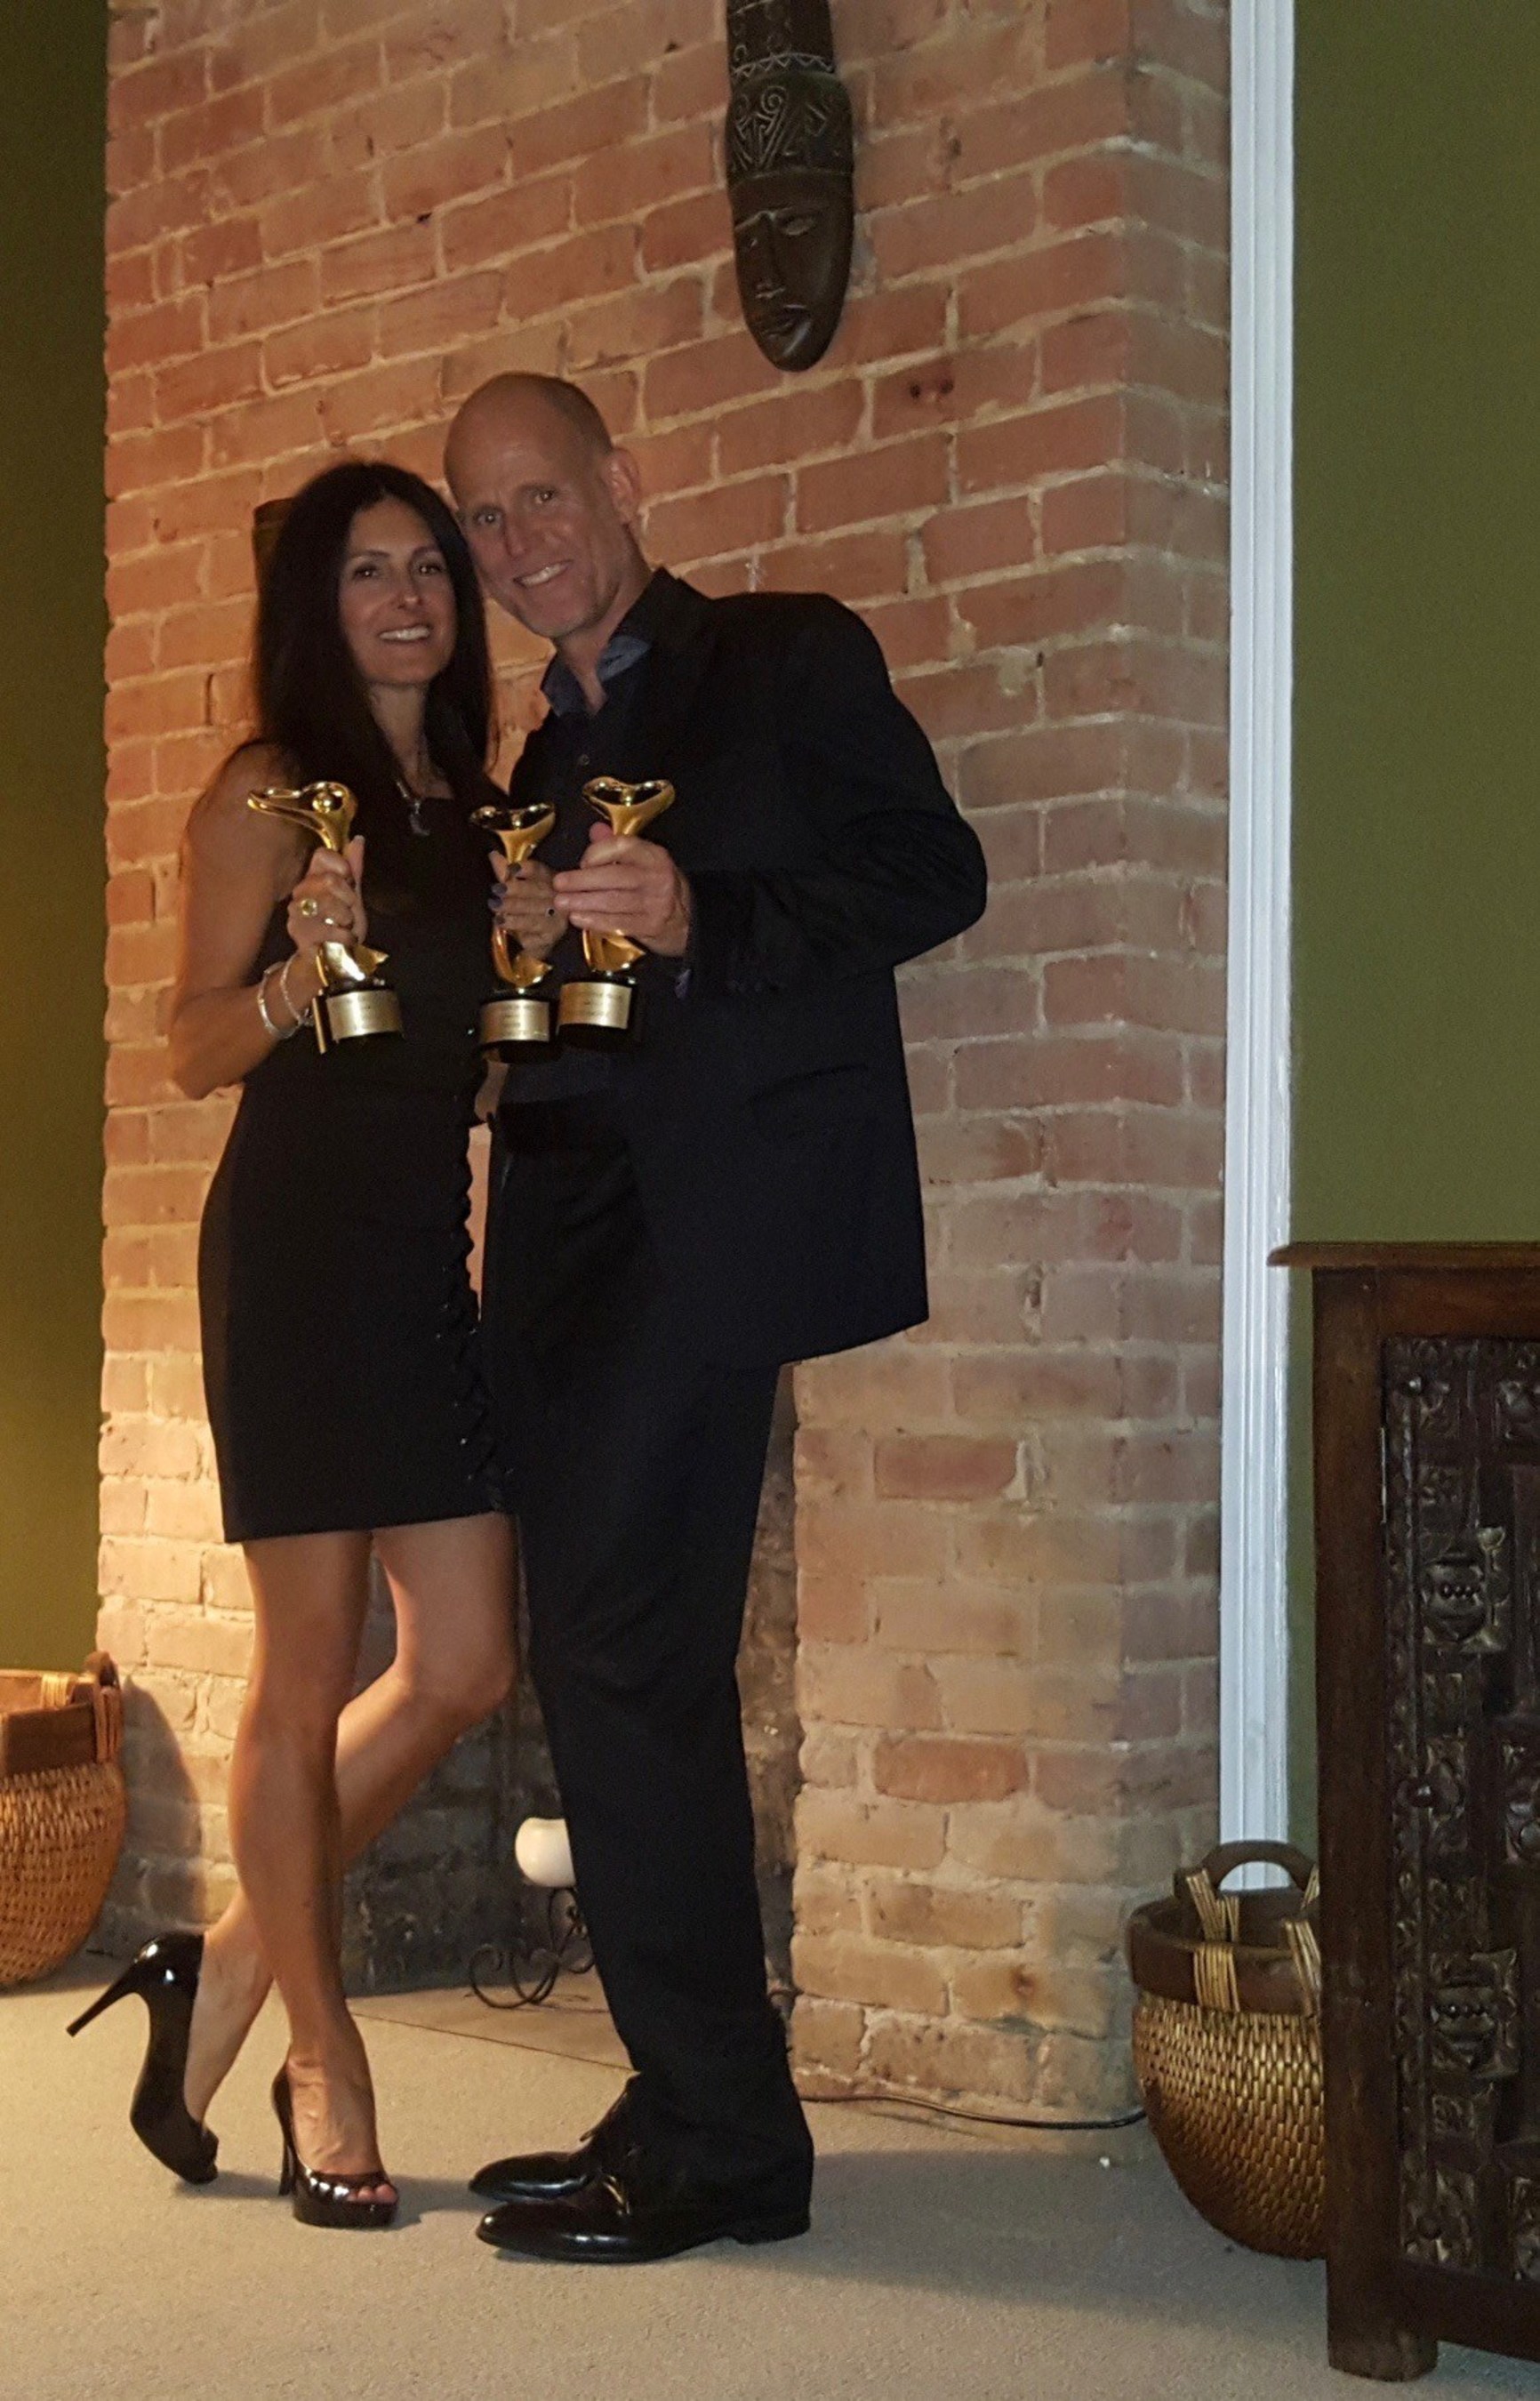 Dallas Couple Win Several Coveted Awards at 2016 Annual Lifestyle Awards picture